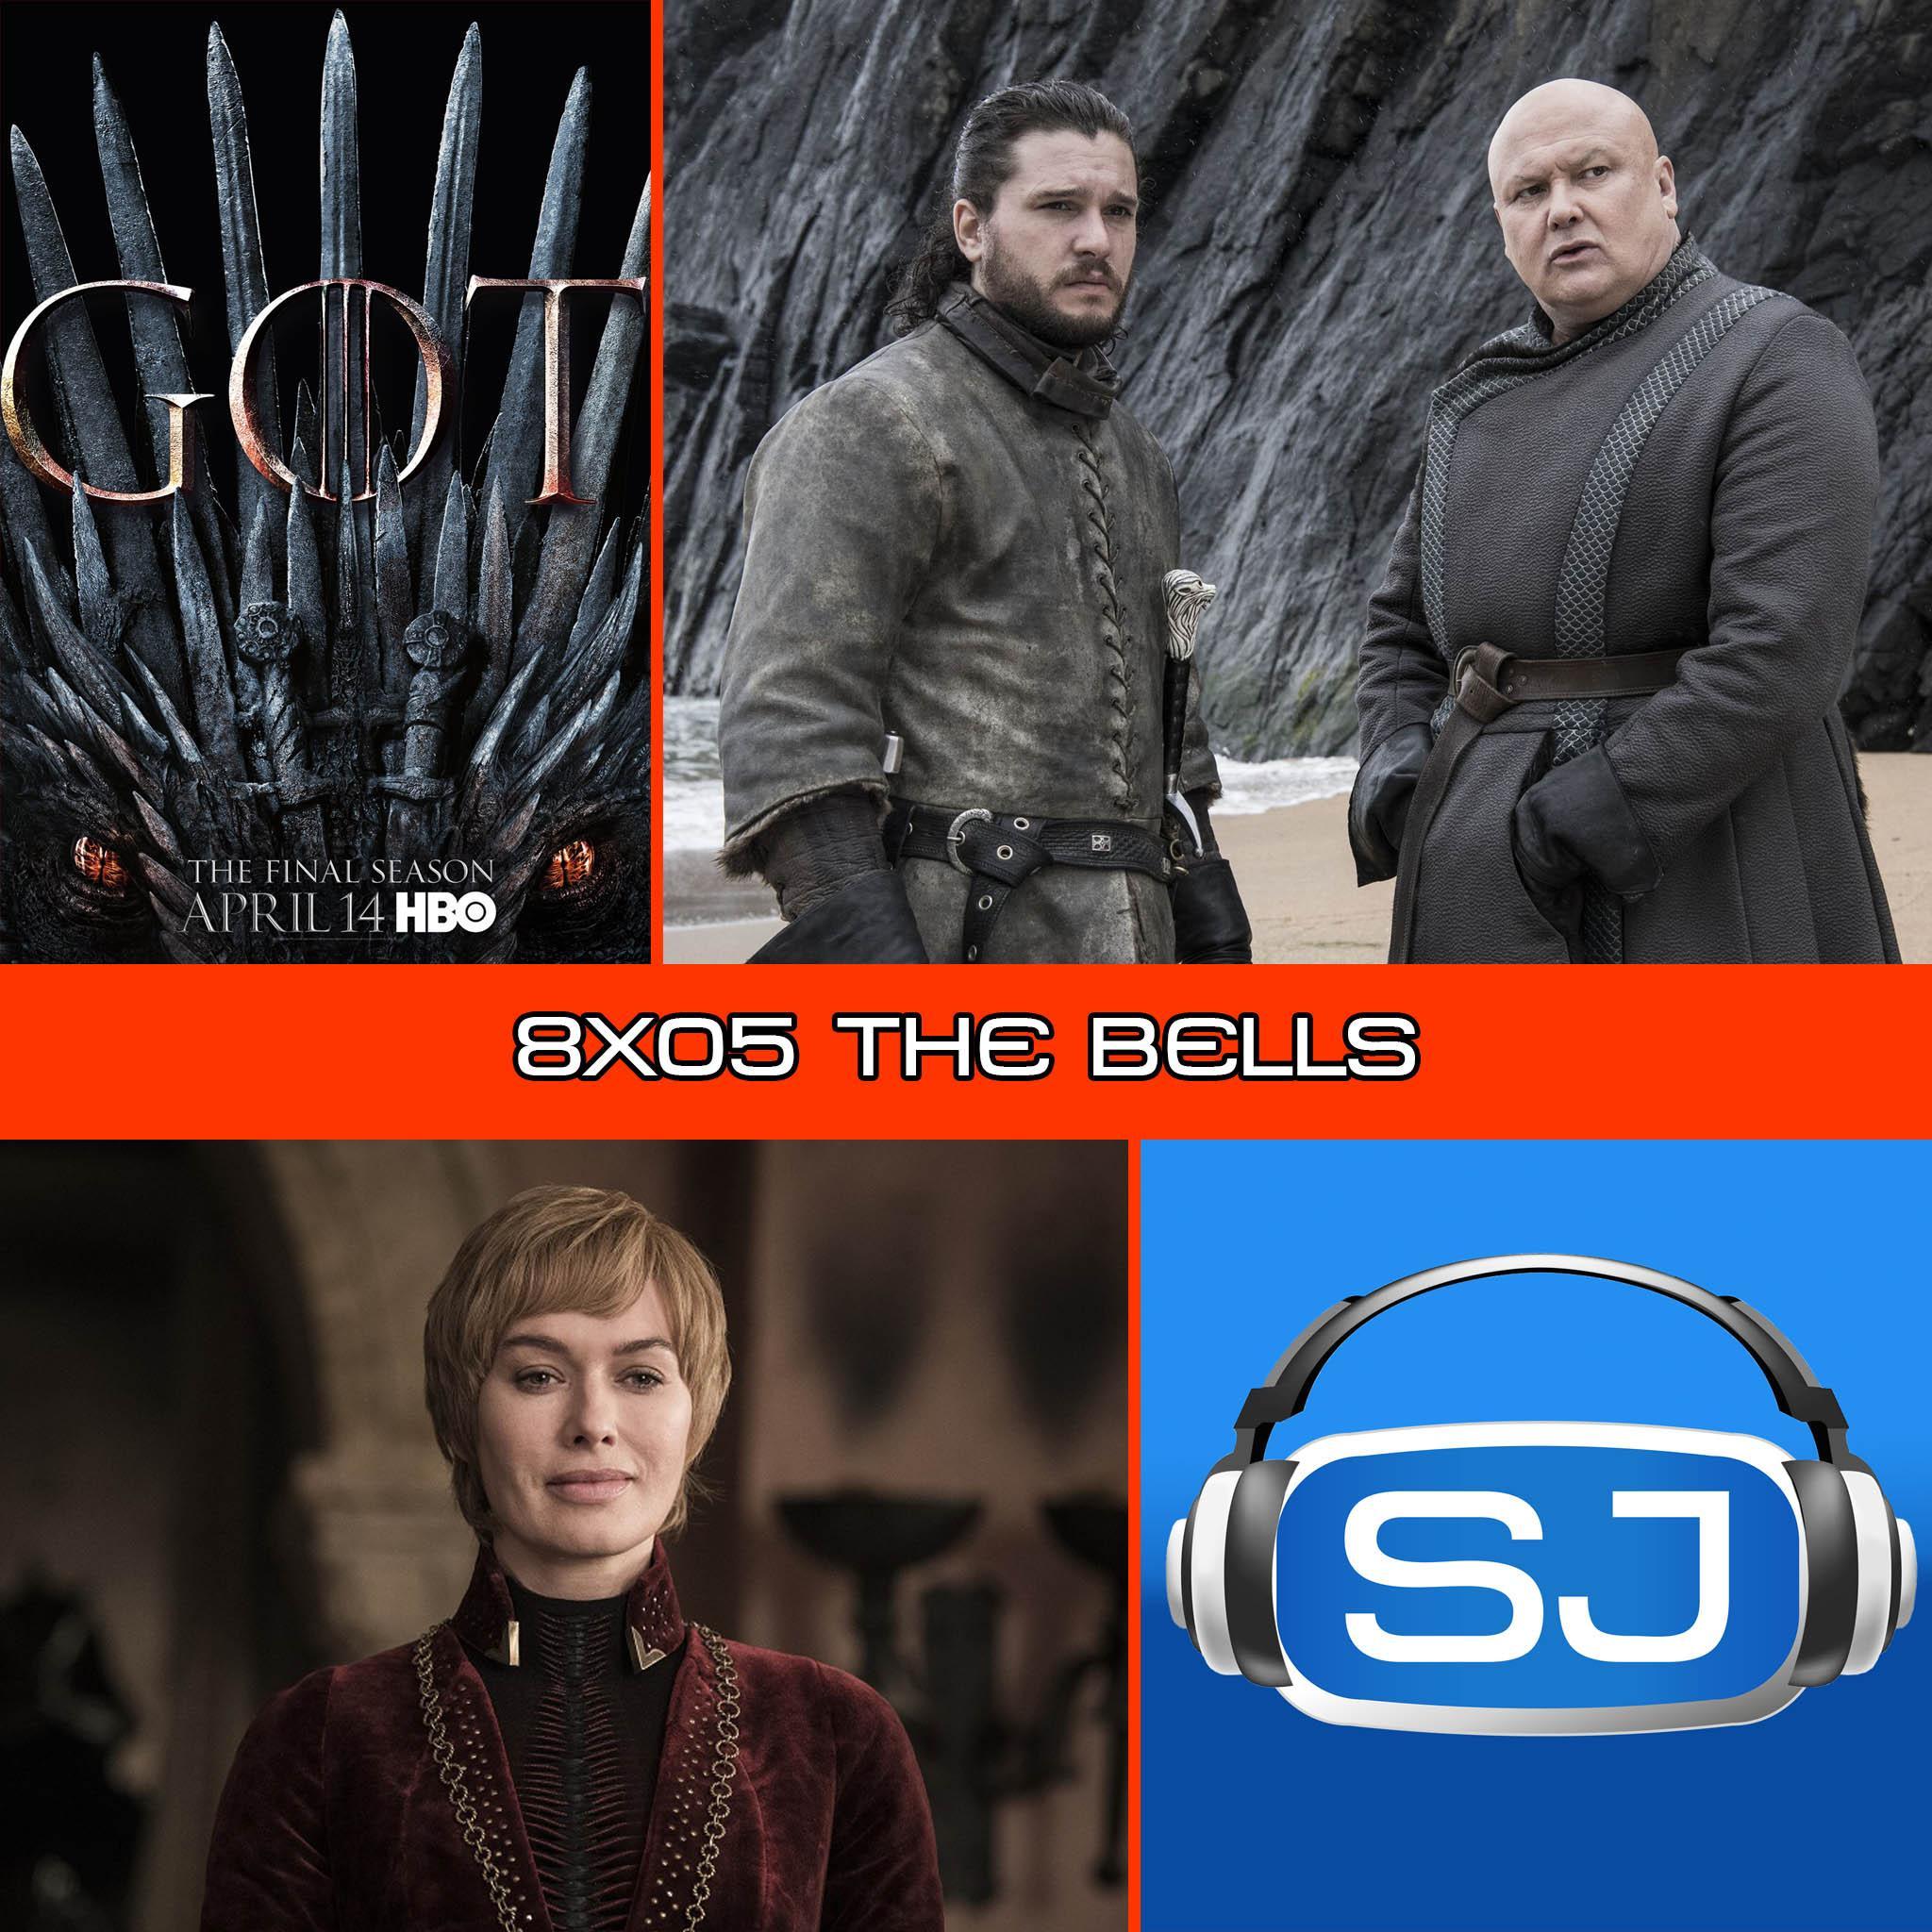 Game of Thrones 8x05 The Bells